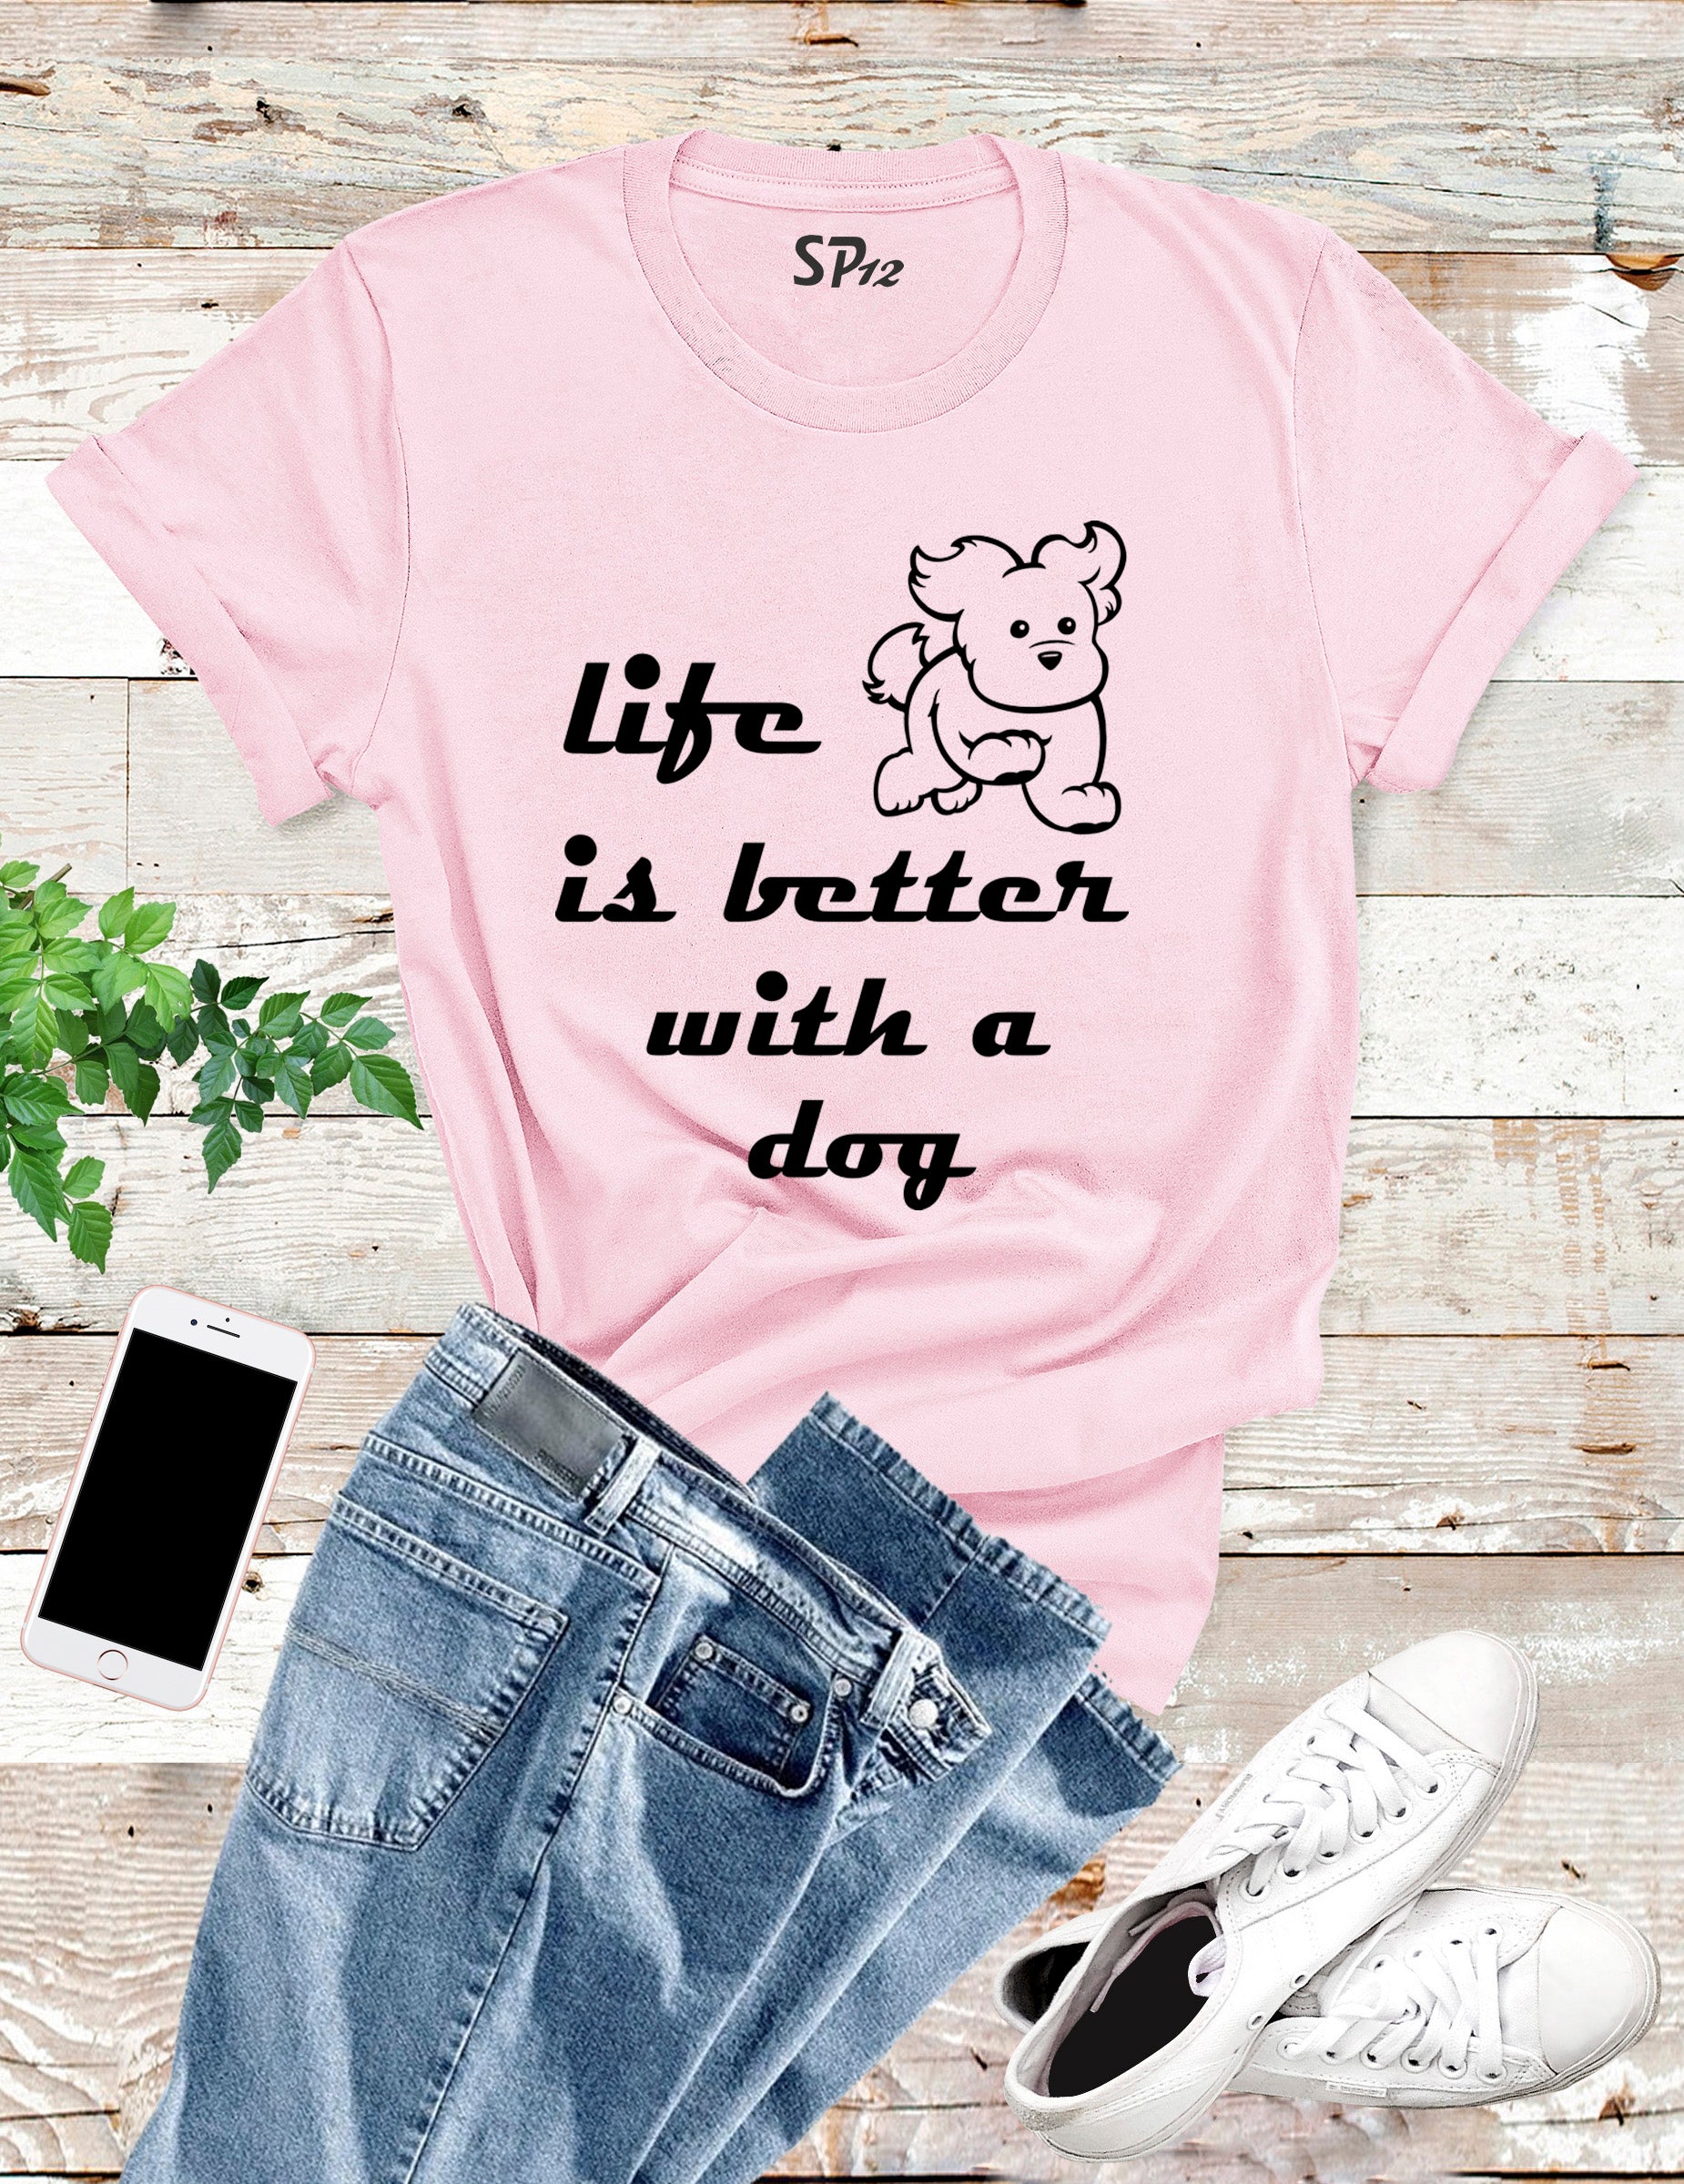 Animal Slogan T Shirt Life is Better with a dog